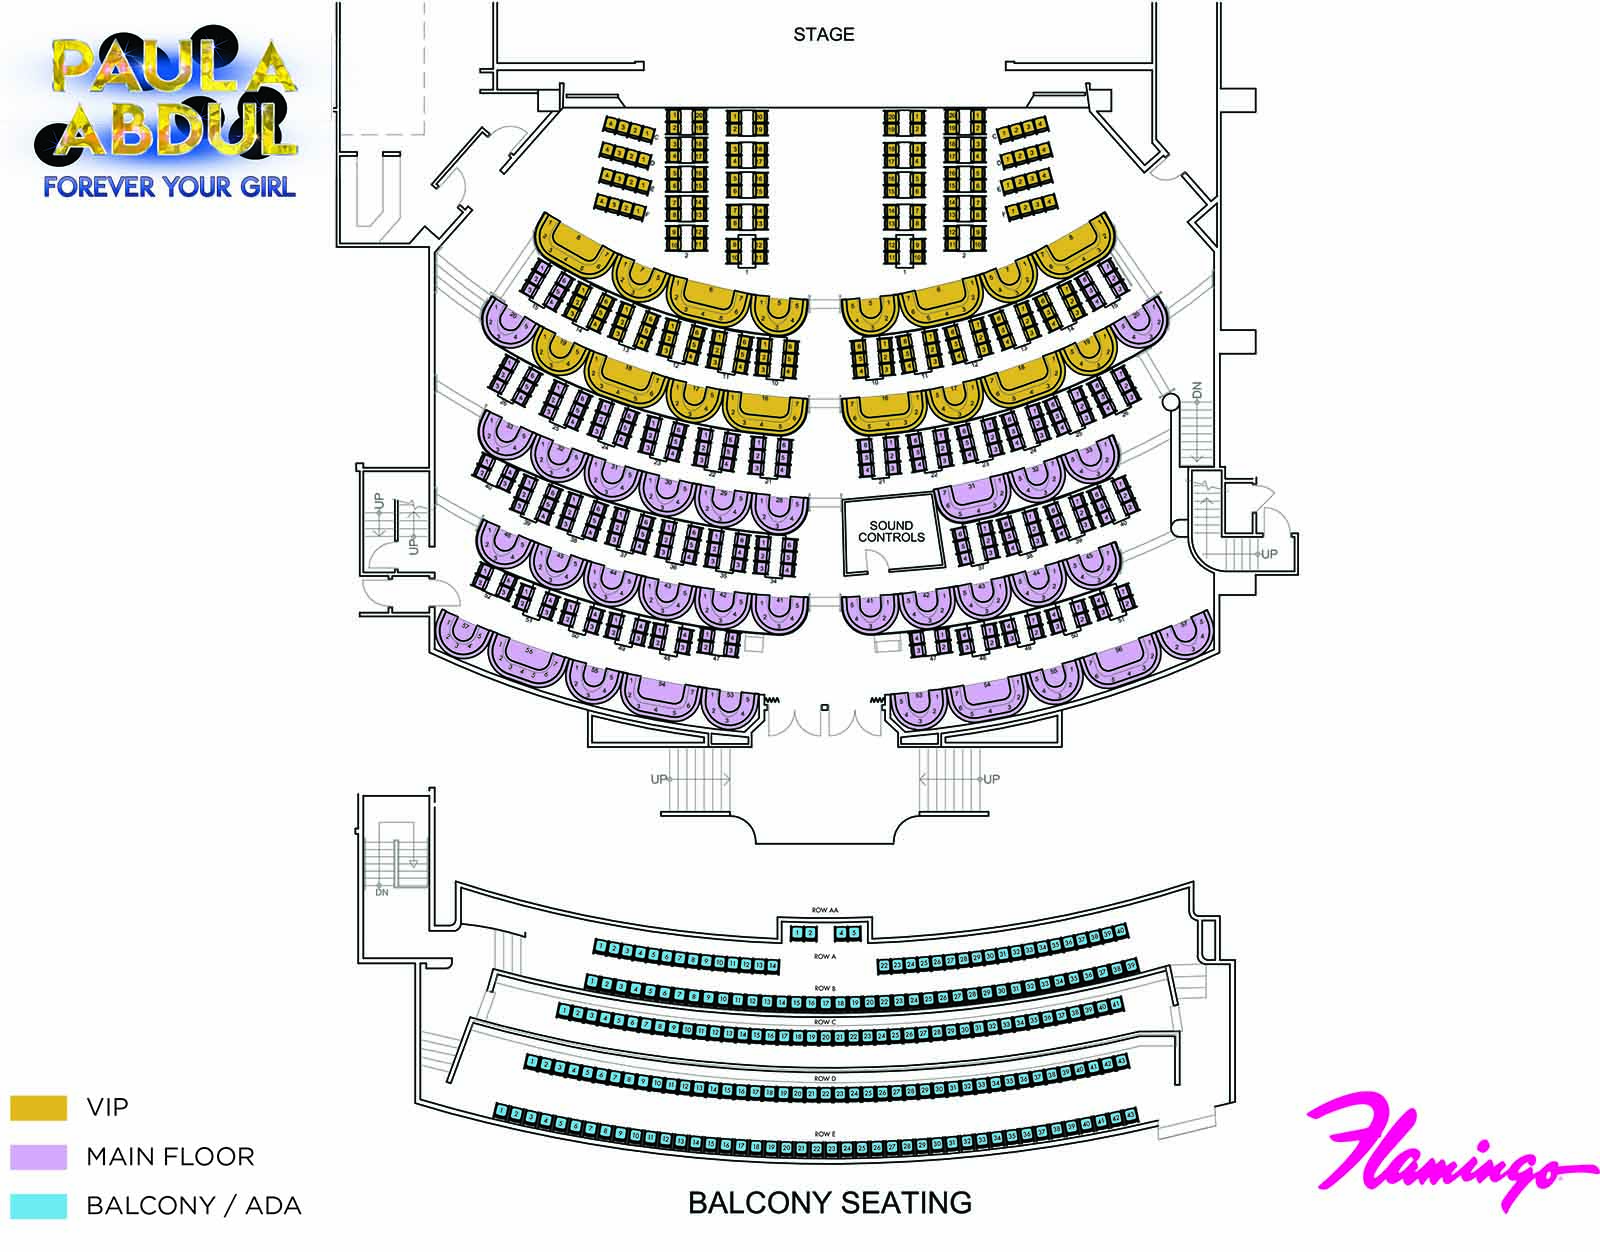 Planet Hollywood Theater Las Vegas Seating Chart